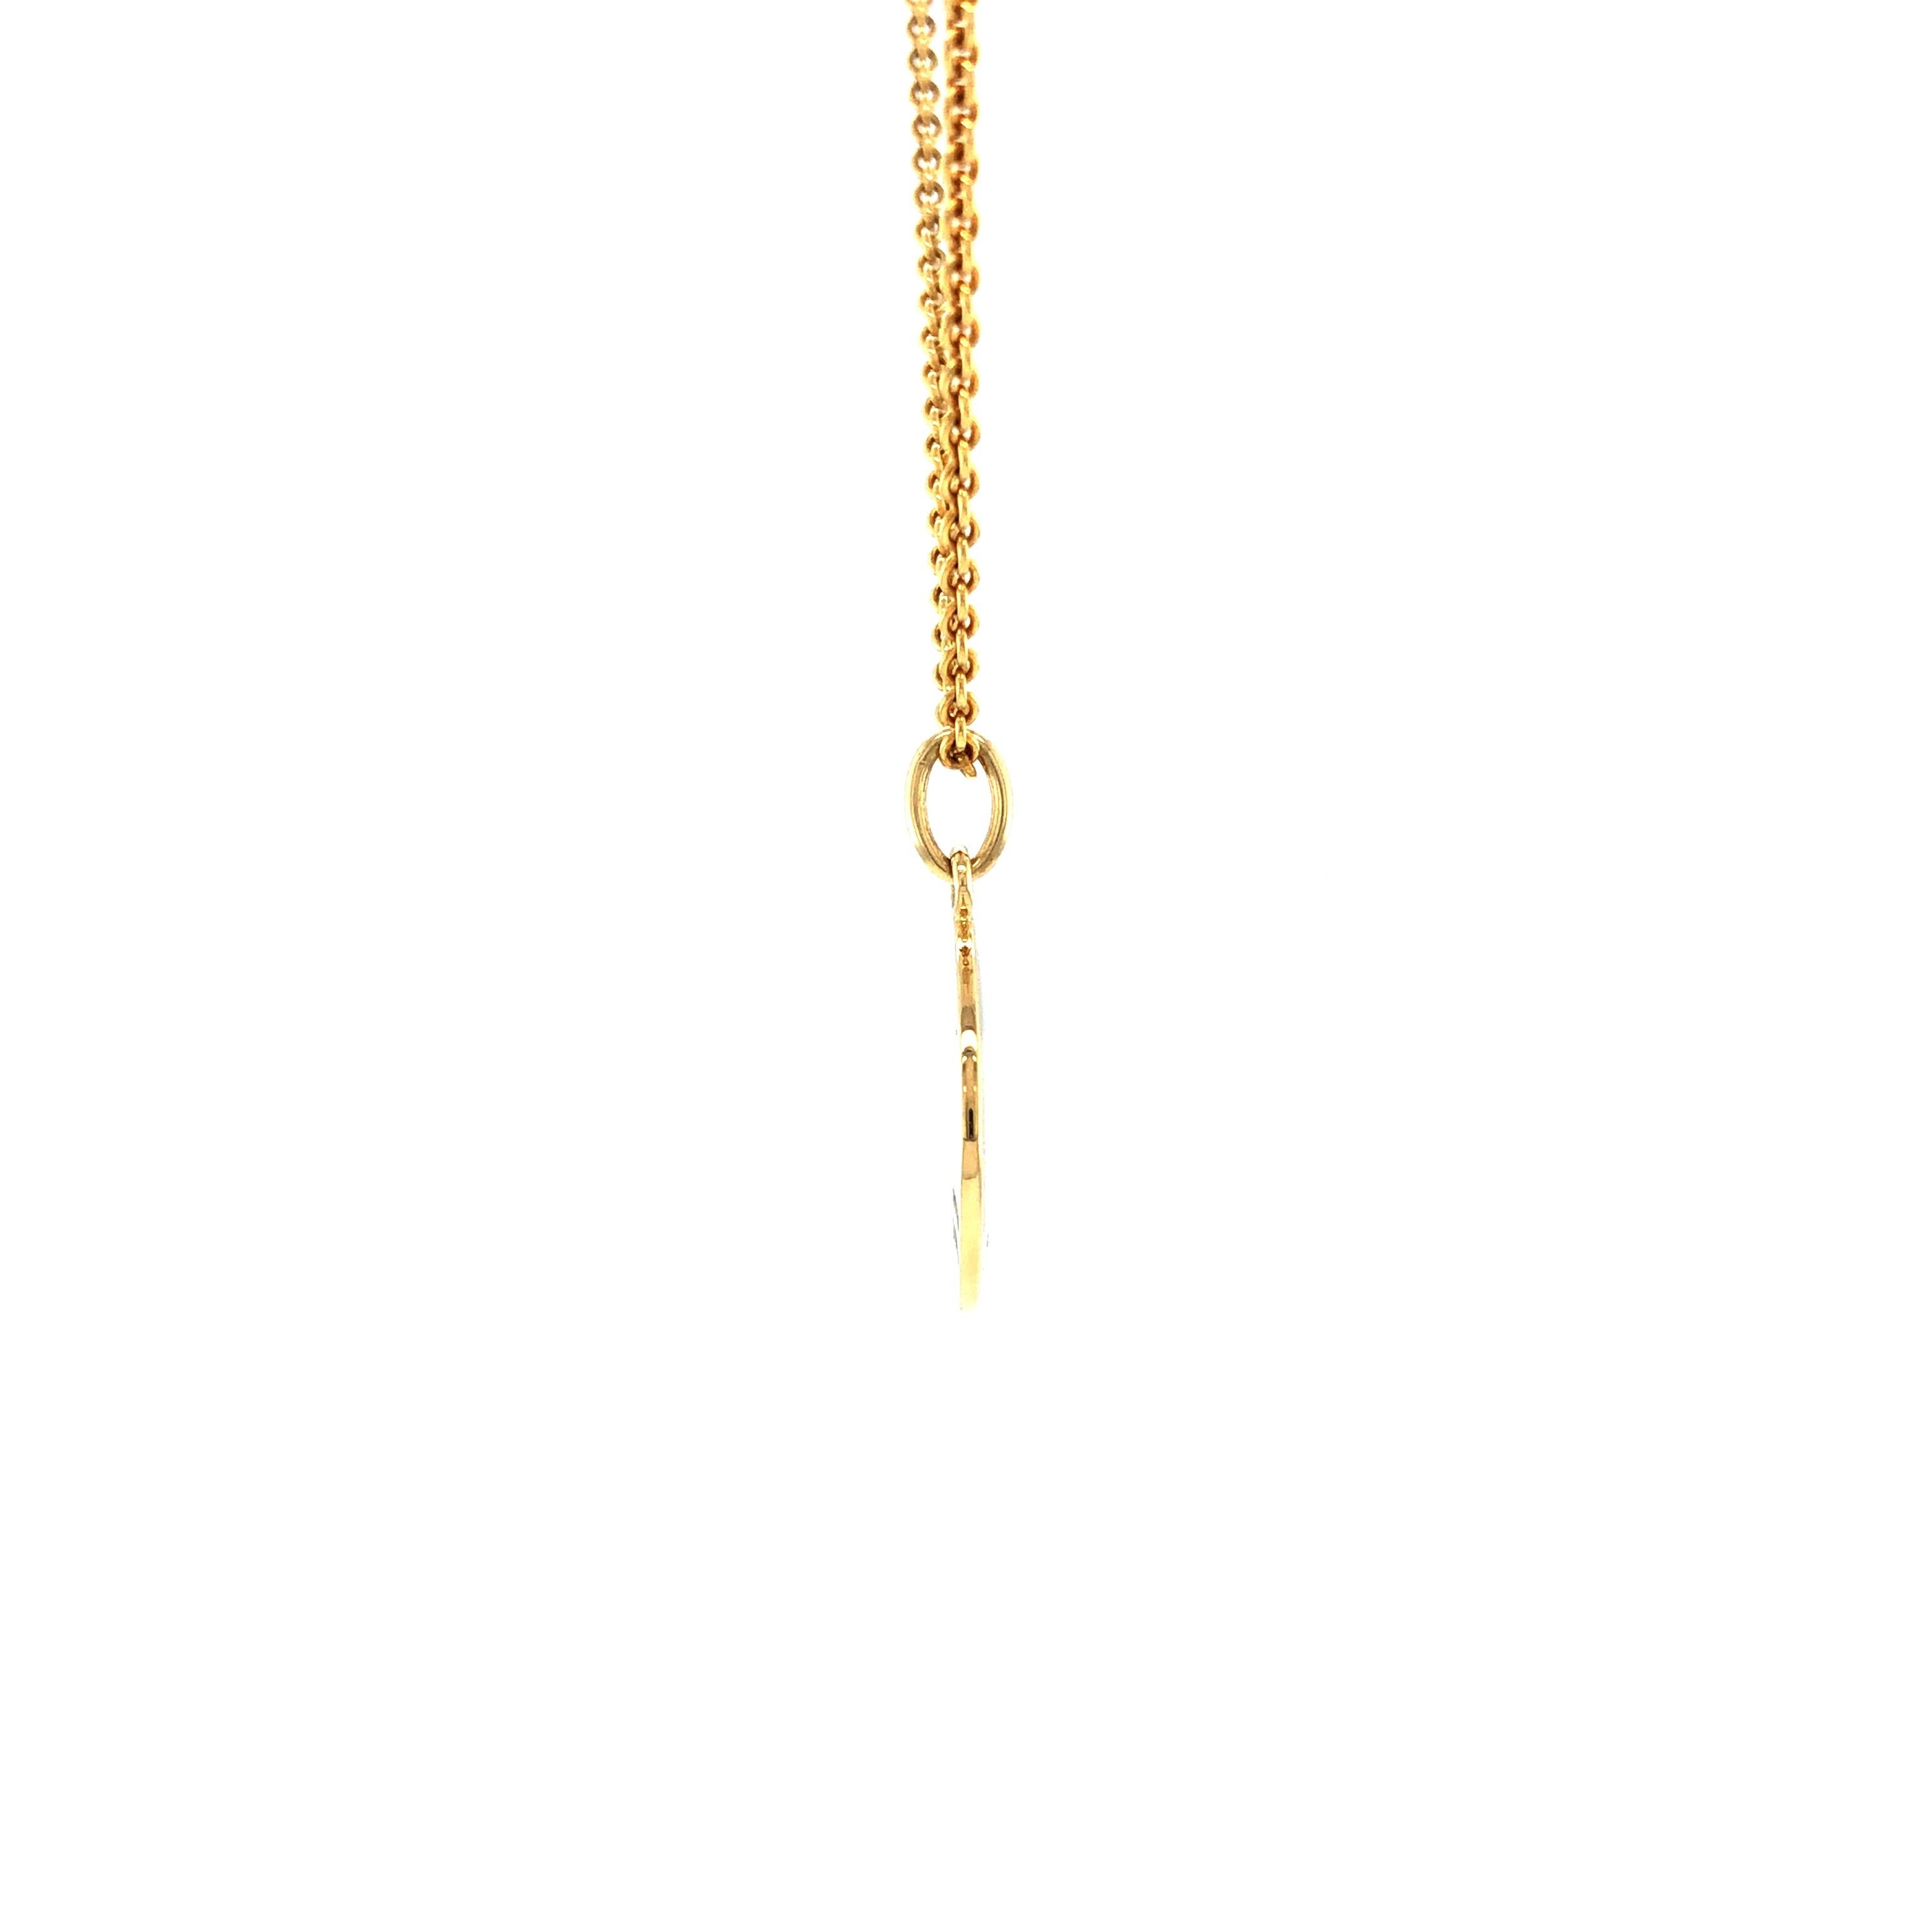 Round Diskos Pendant Necklace 18k Yellow Gold  White Guilloche Enamel 15.0 mm For Sale 1